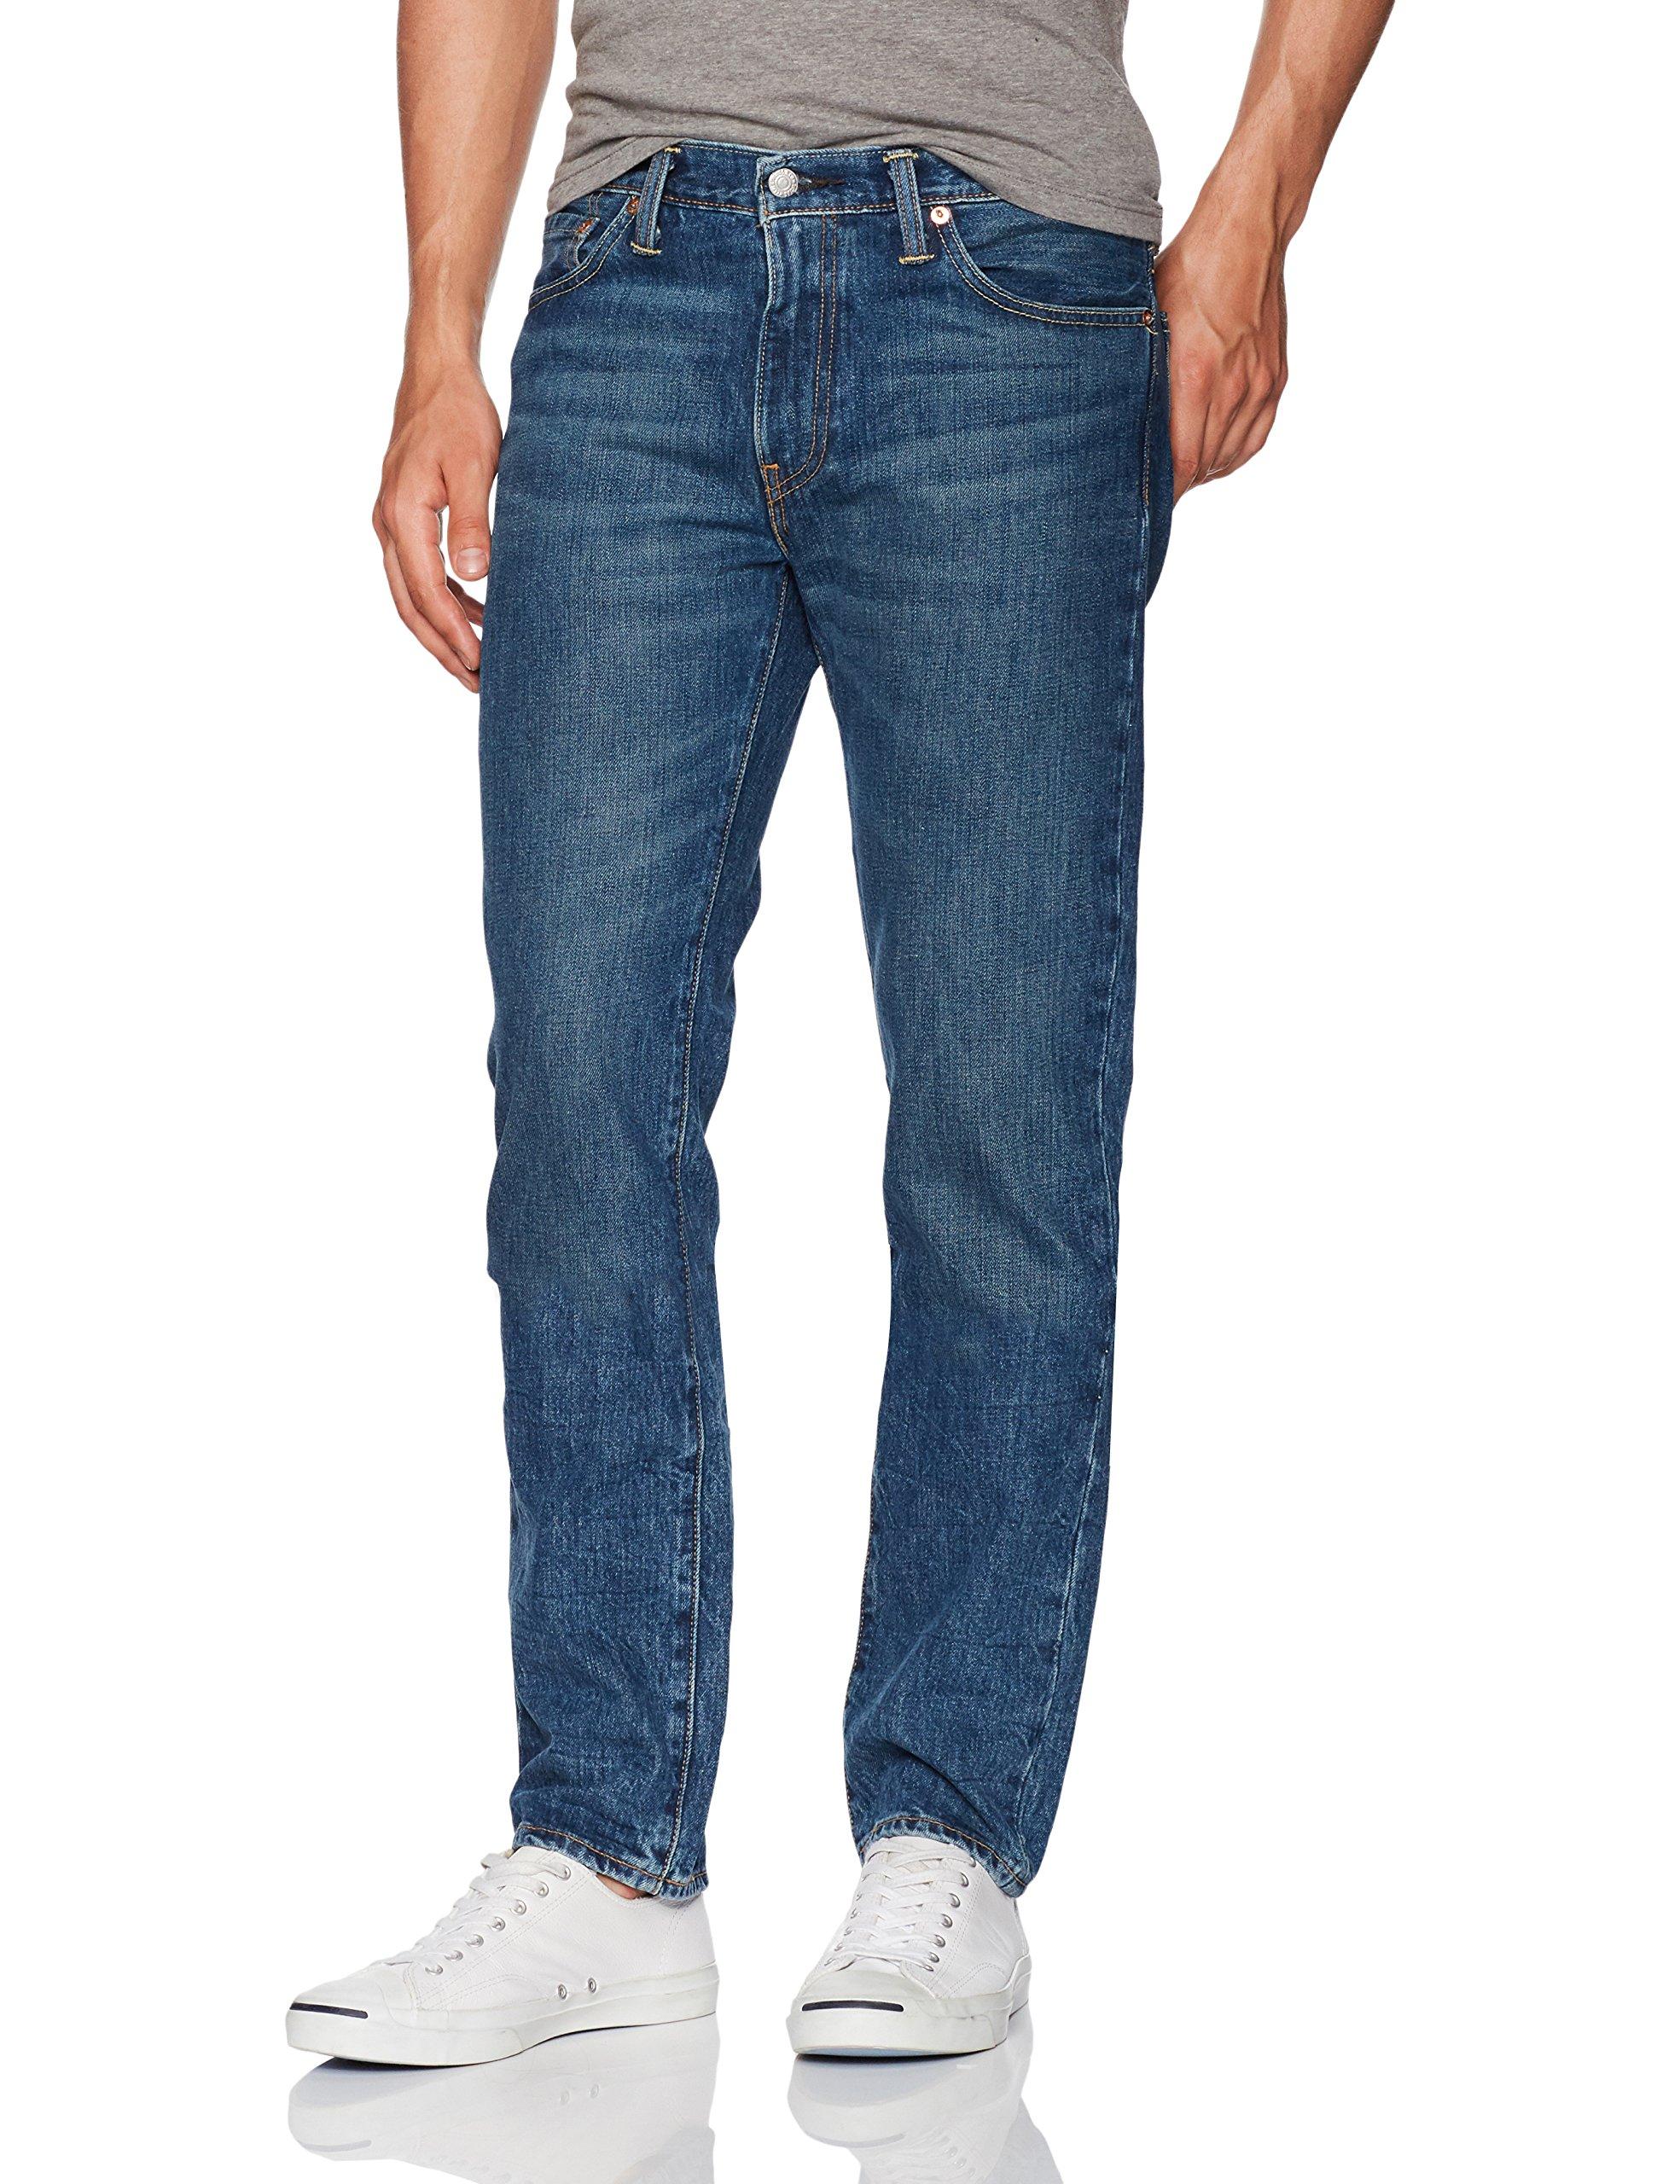 Levi's Denim Made In The Usa 511 Slim Fit Jean in Blue for Men - Save ...